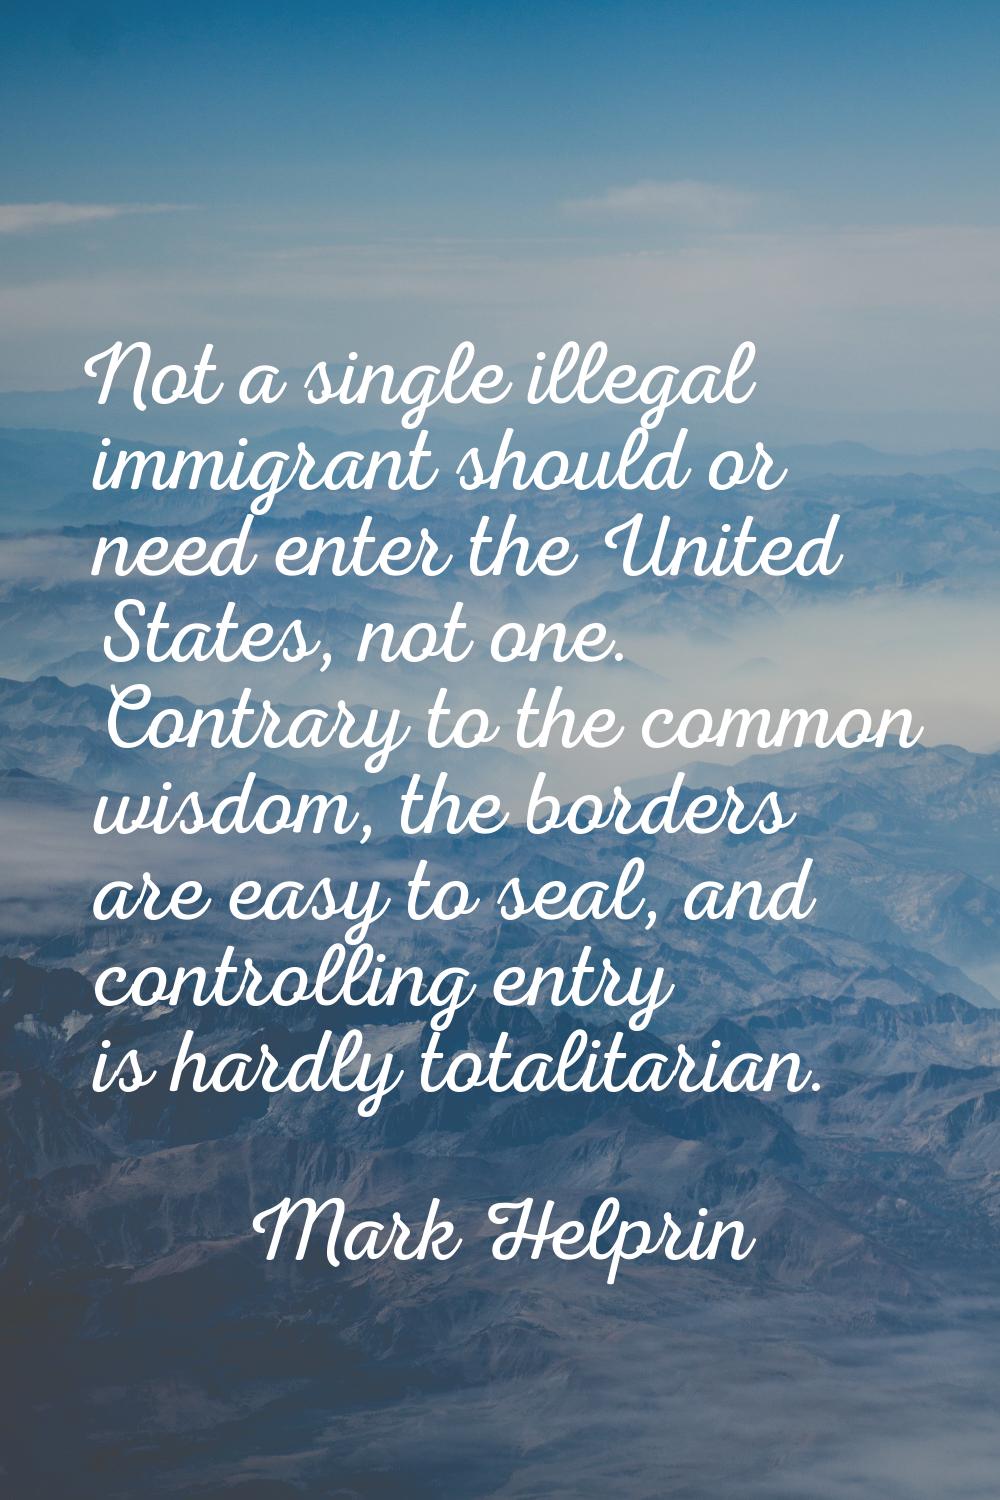 Not a single illegal immigrant should or need enter the United States, not one. Contrary to the com